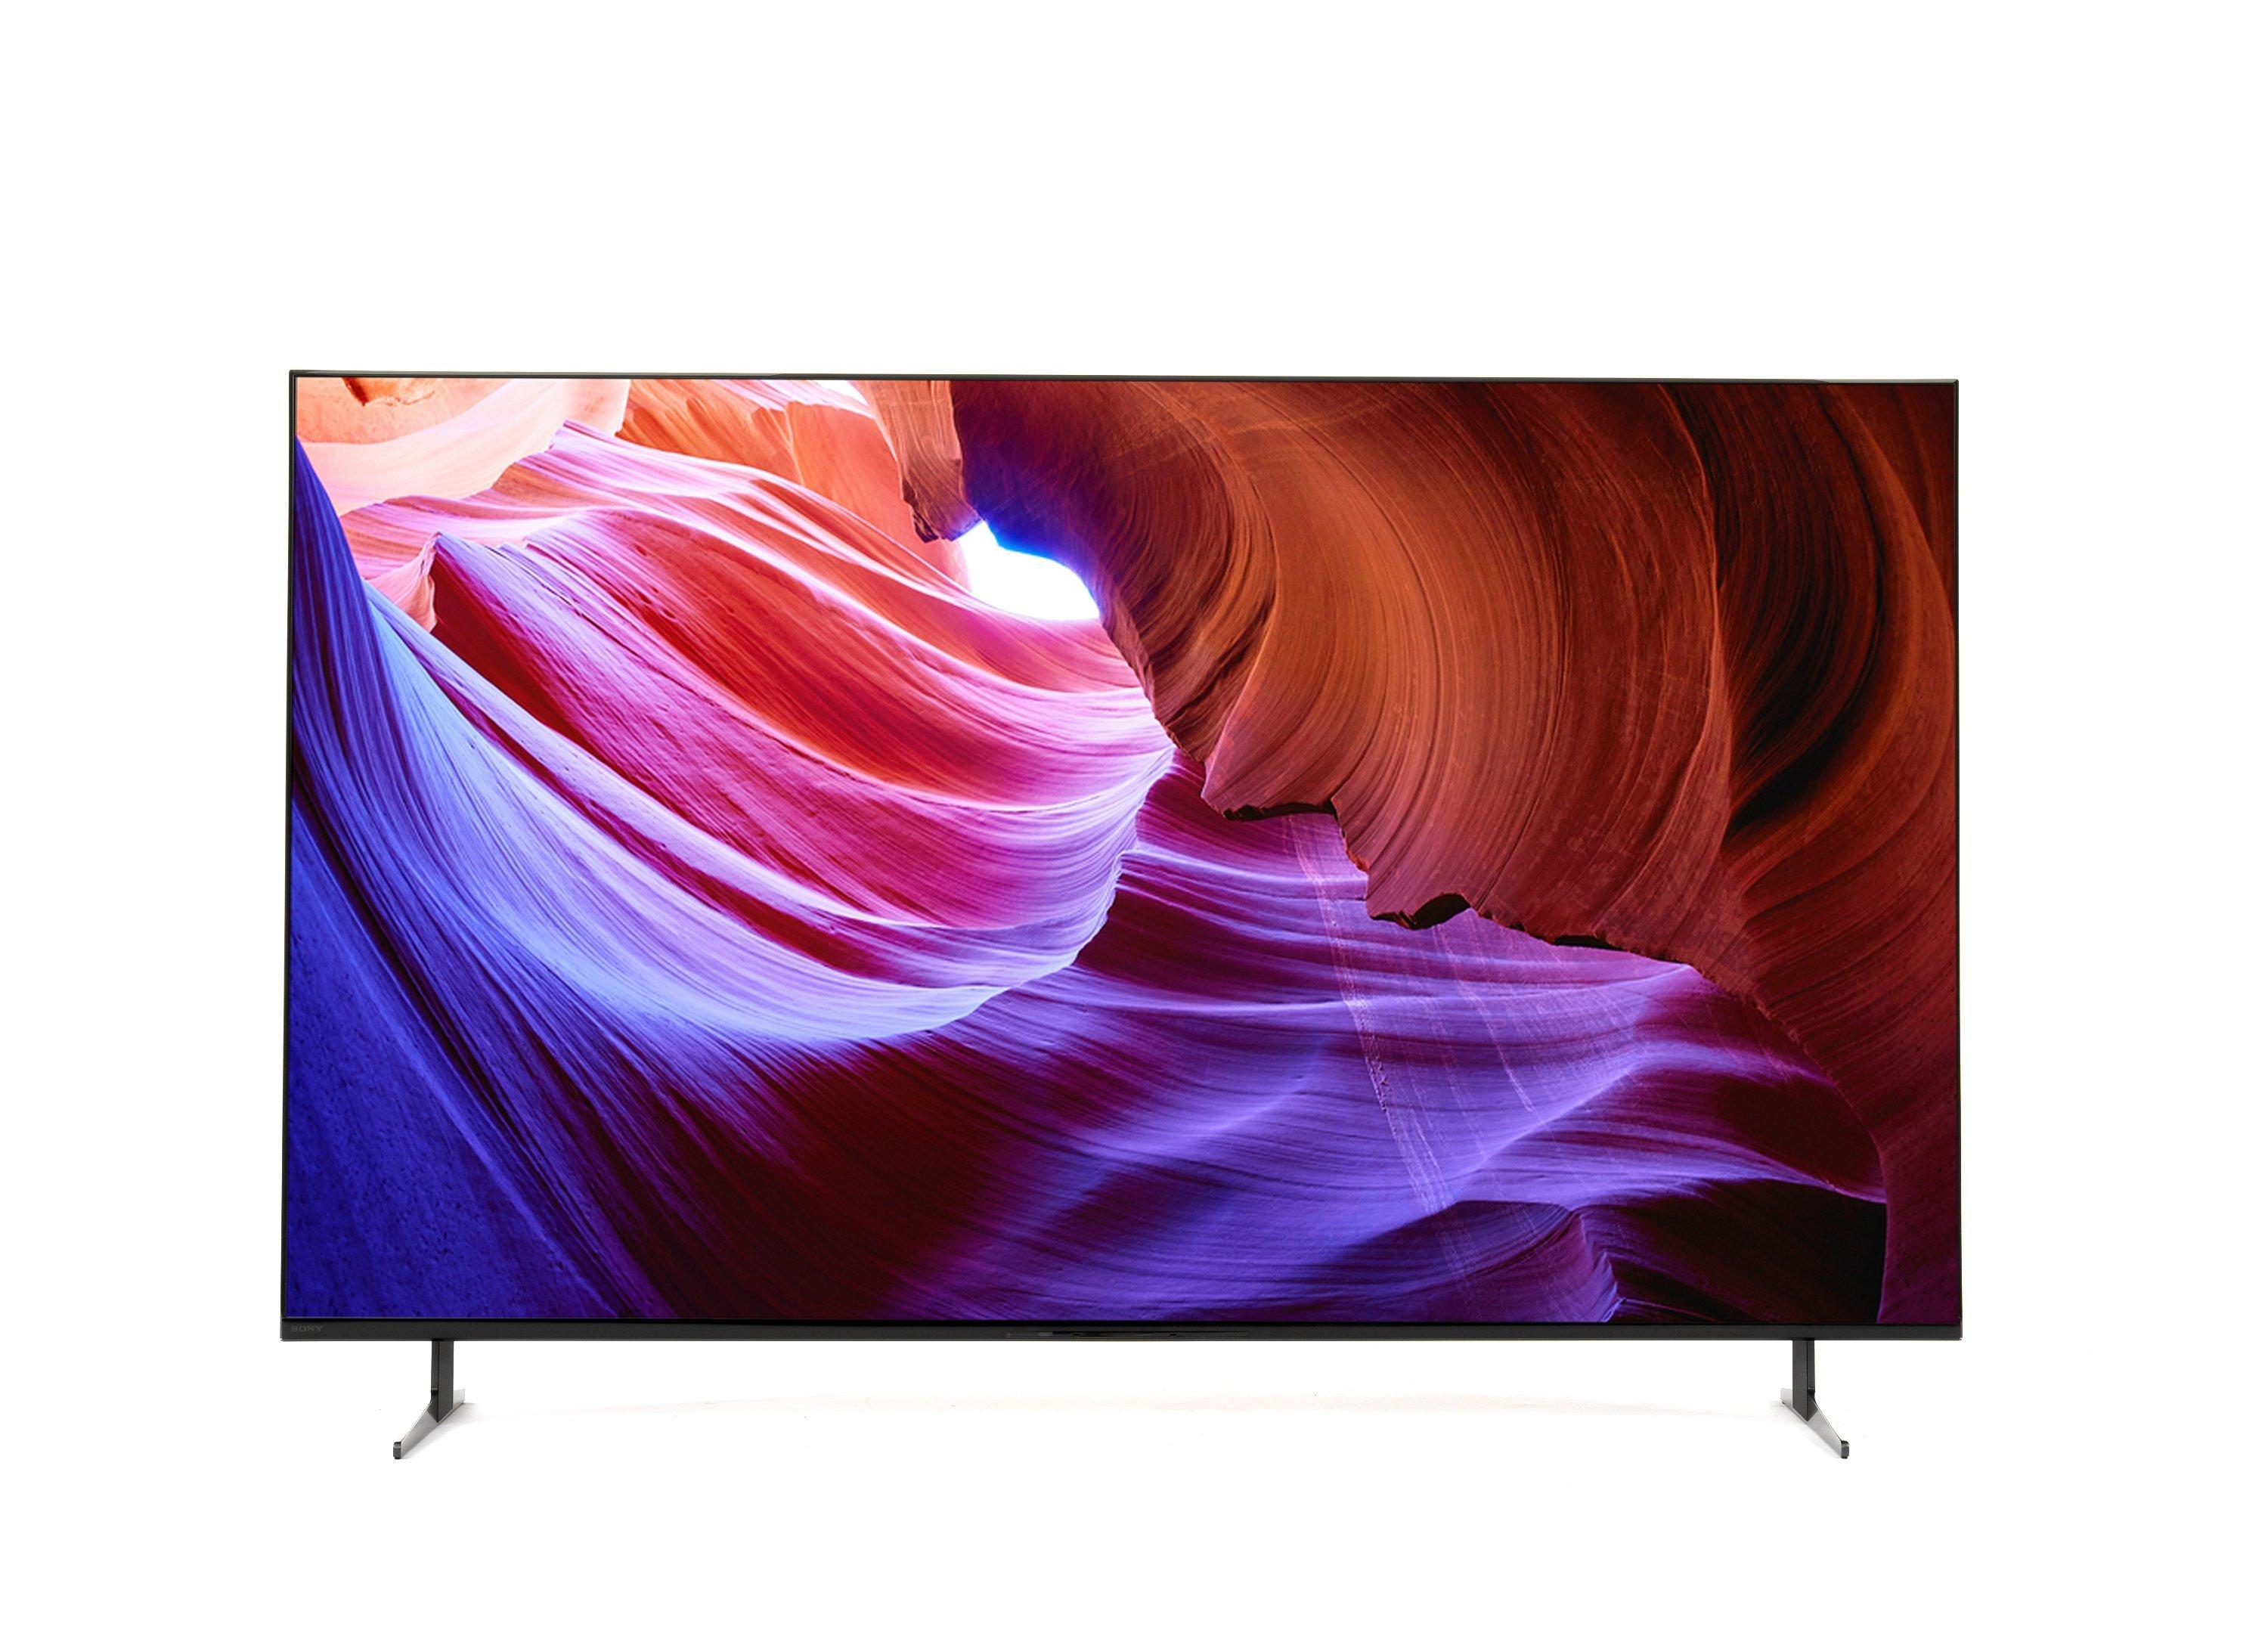 Sony, 55 Inch, 4K HDR, Android TV - eXtra Oman